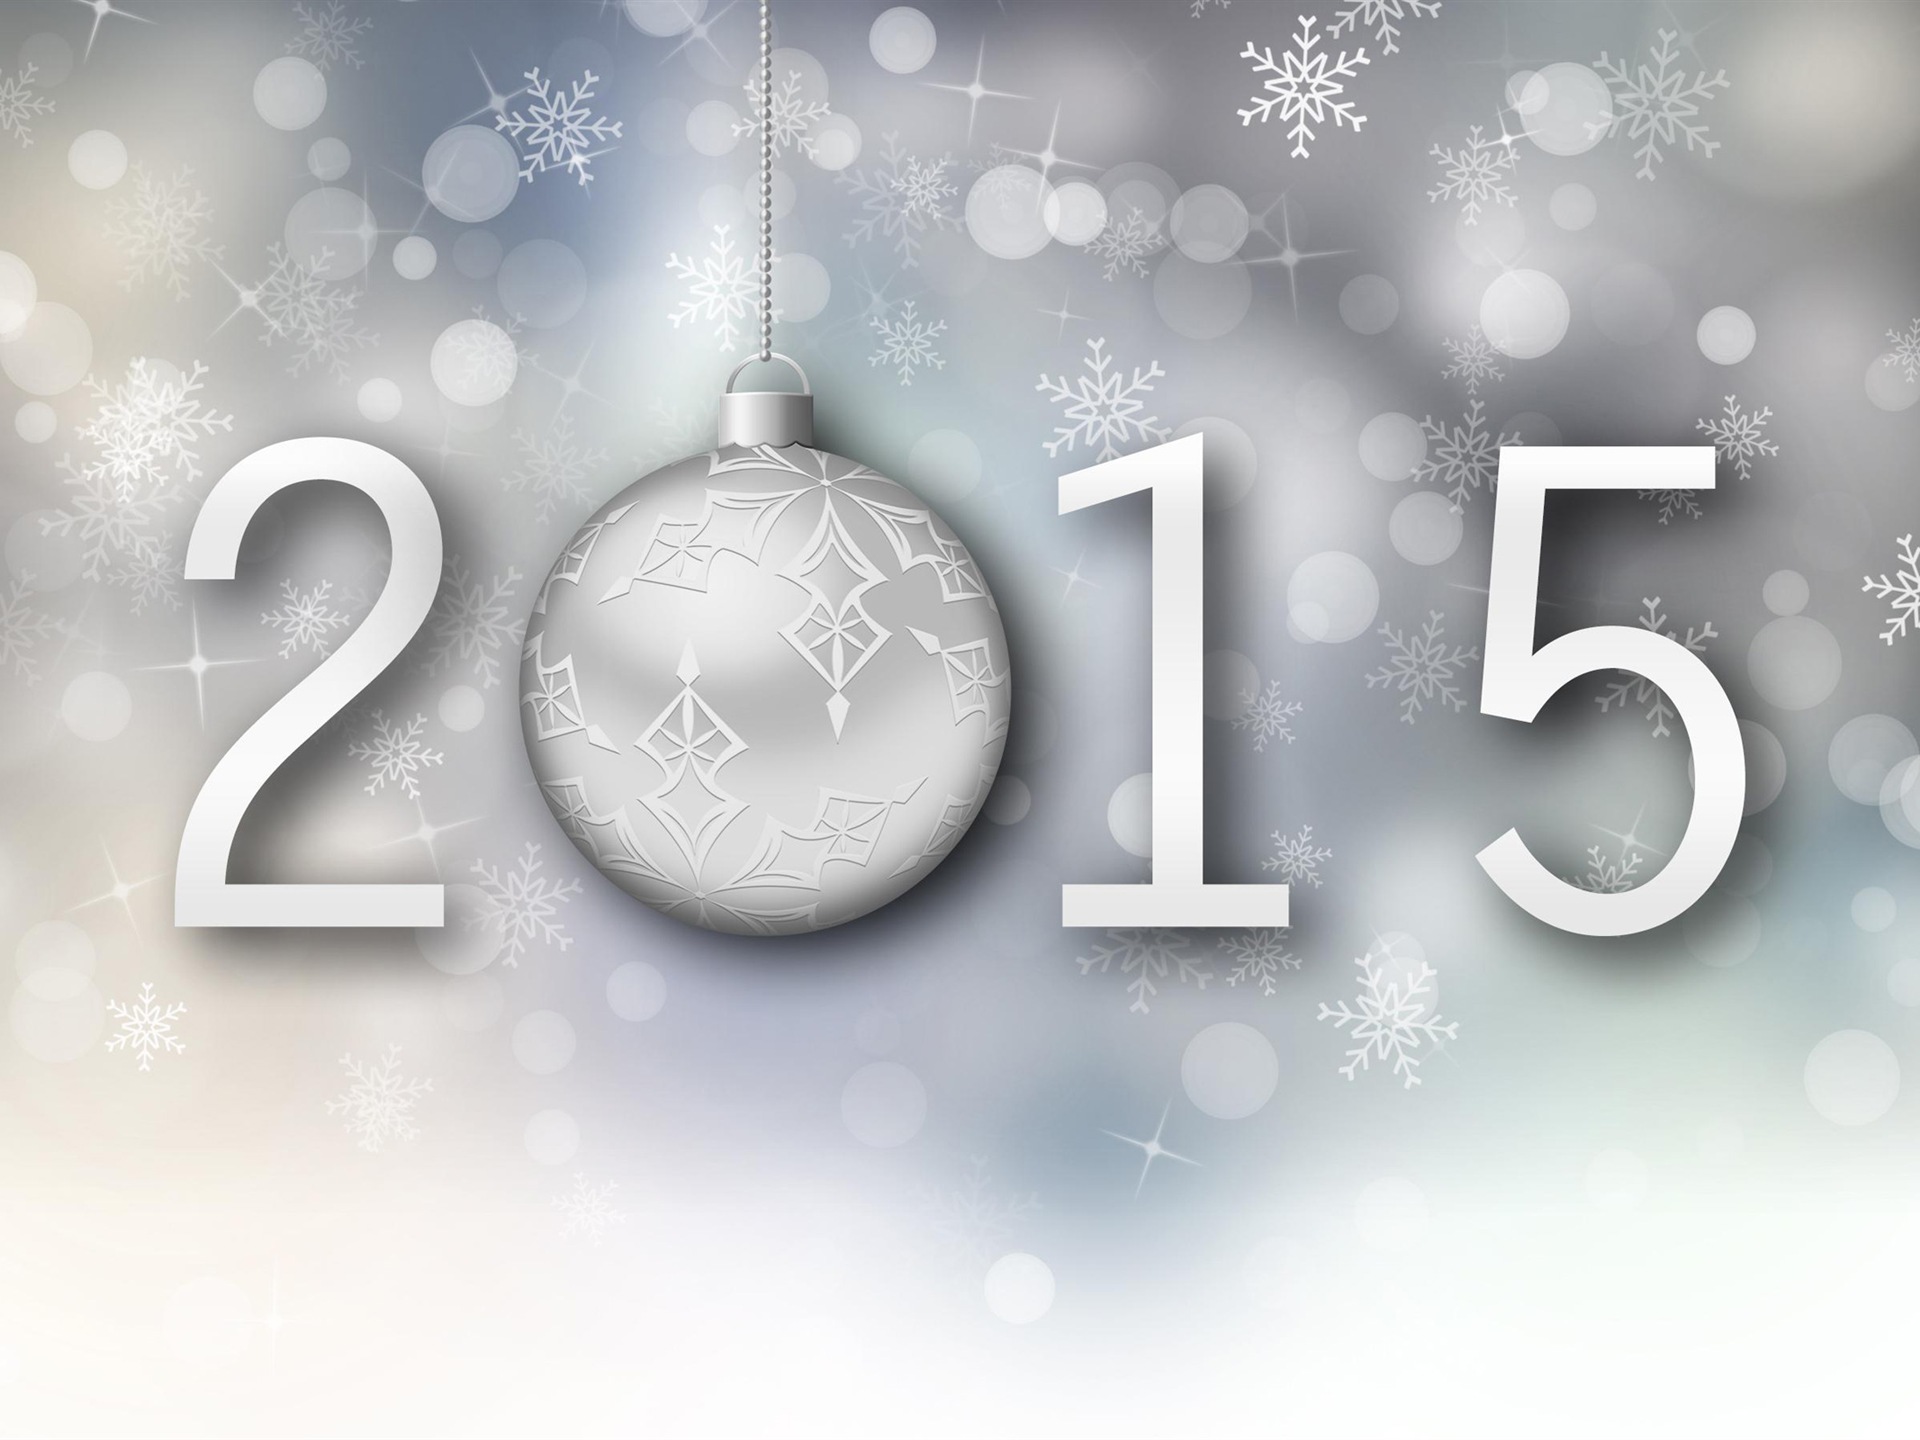 2015 New Year theme HD wallpapers (1) #4 - 1920x1440